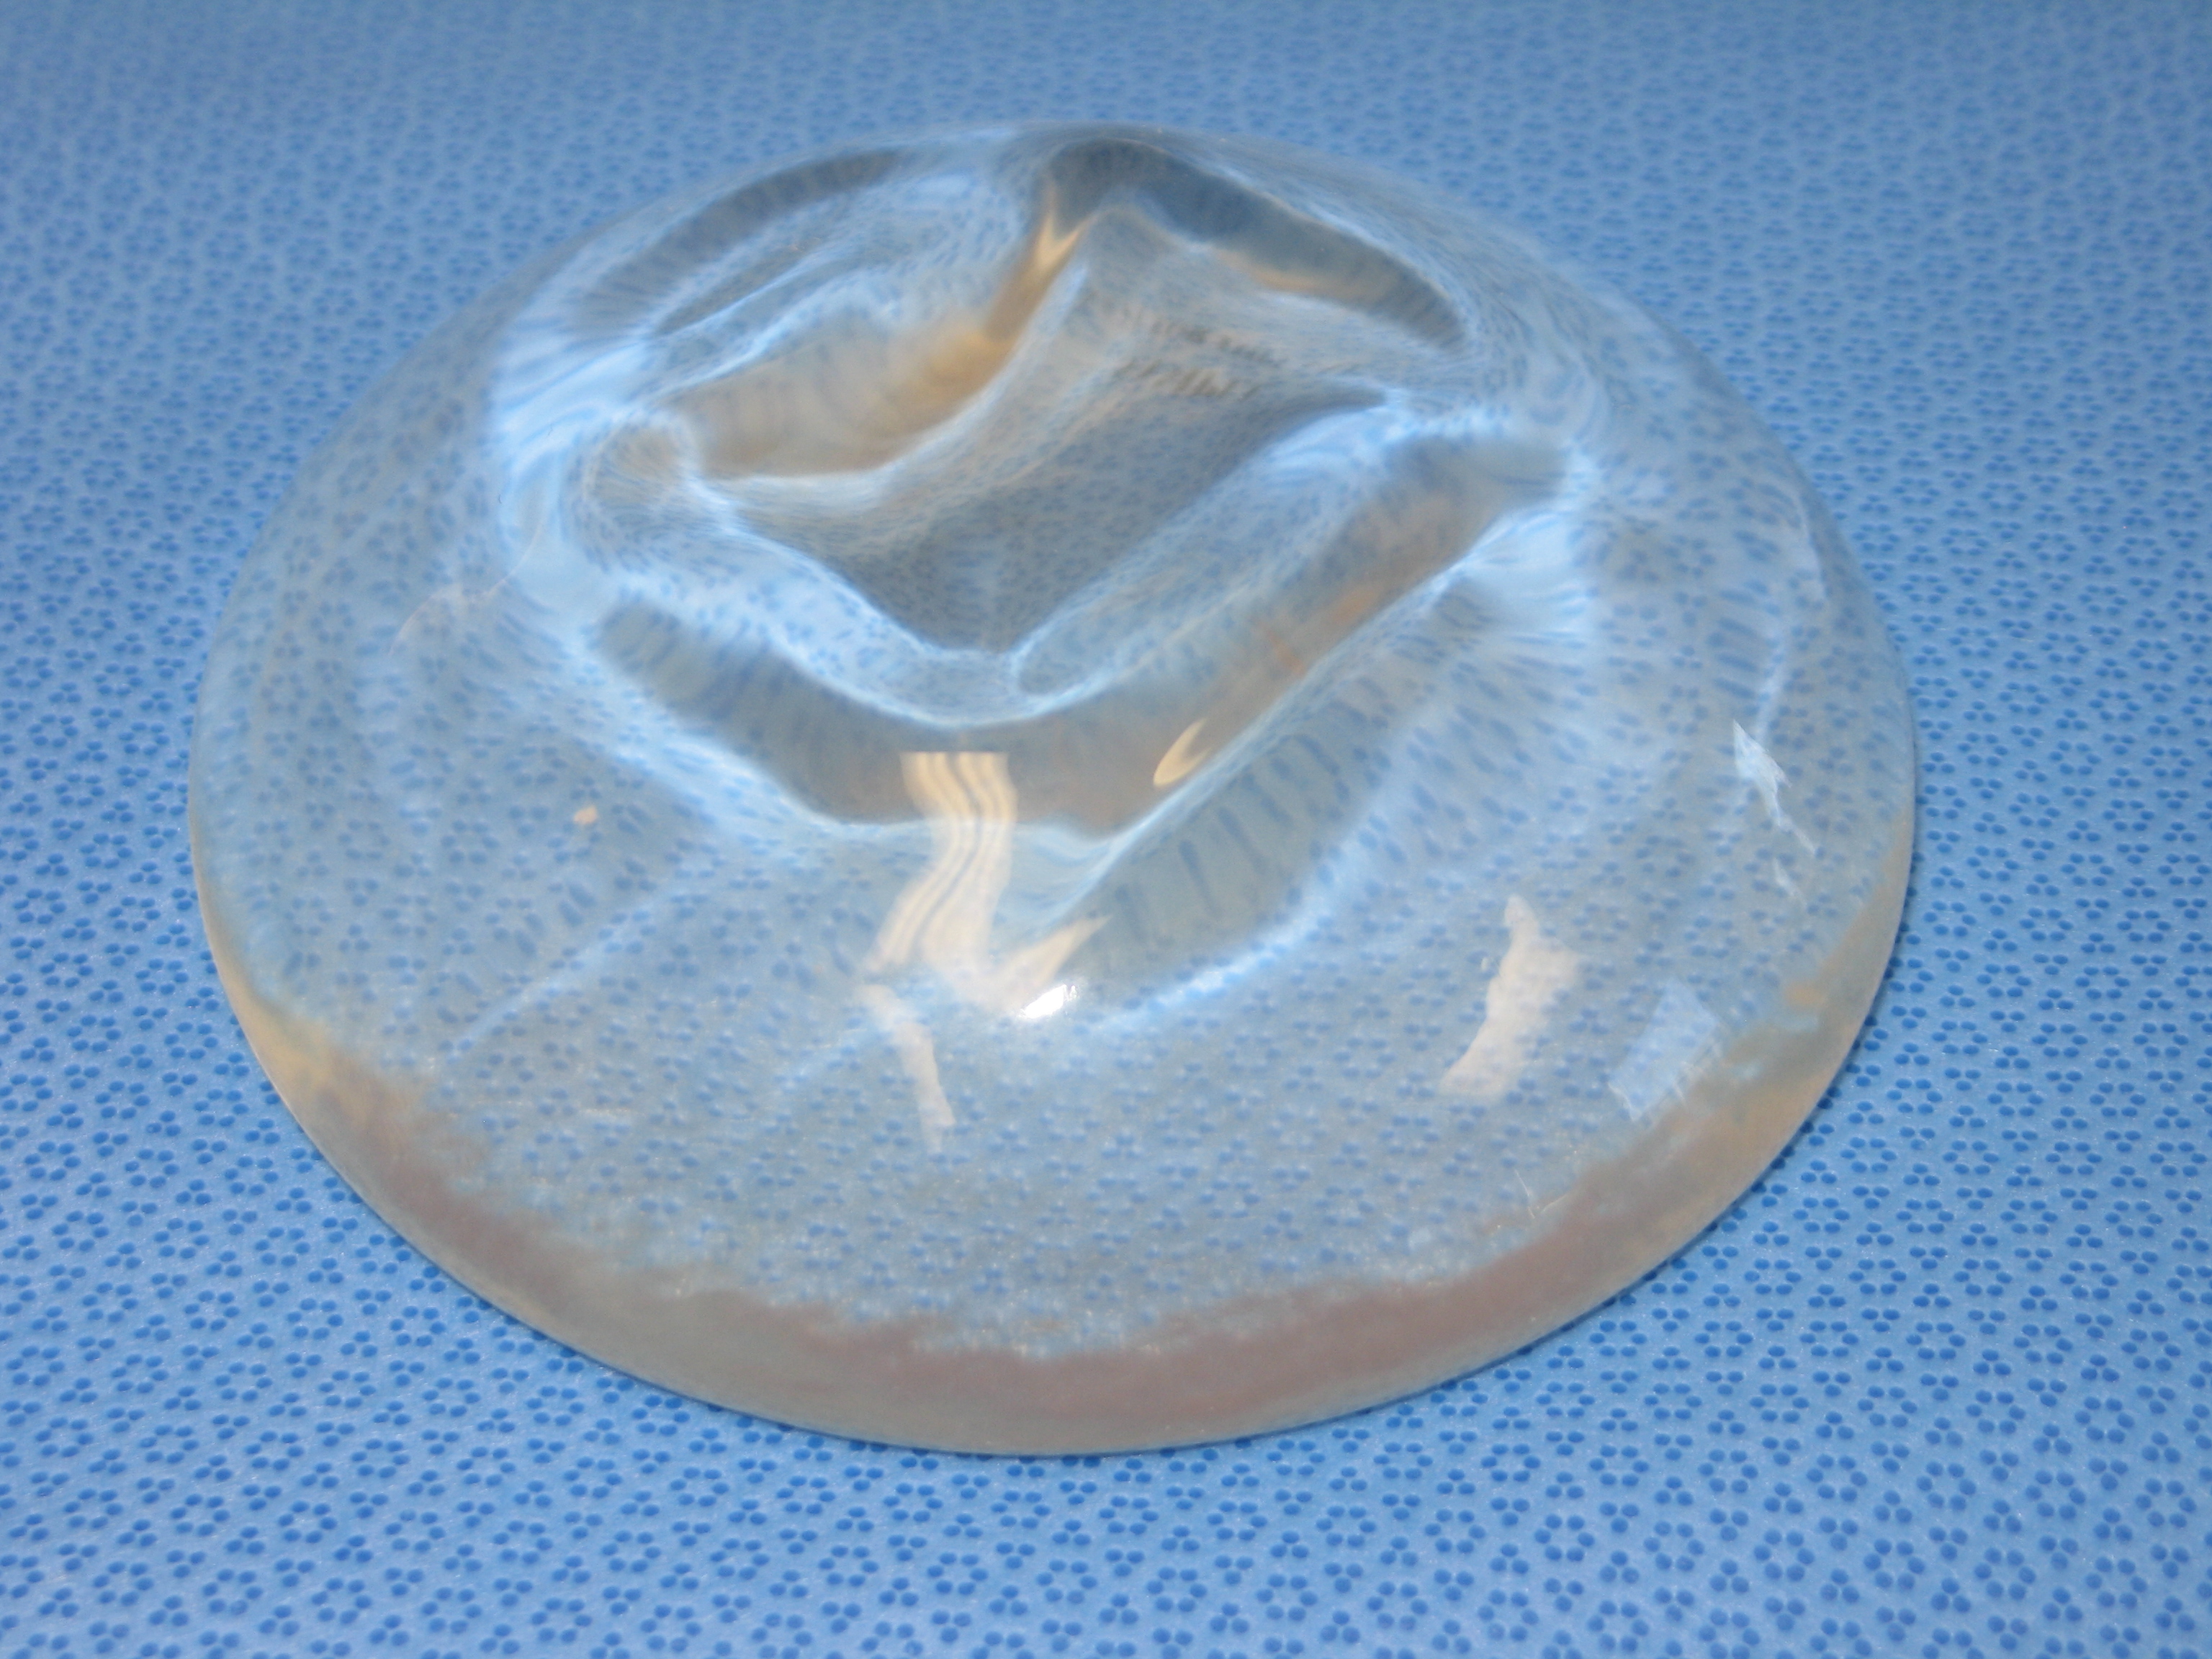 Silicone Breast Implant Photos 28